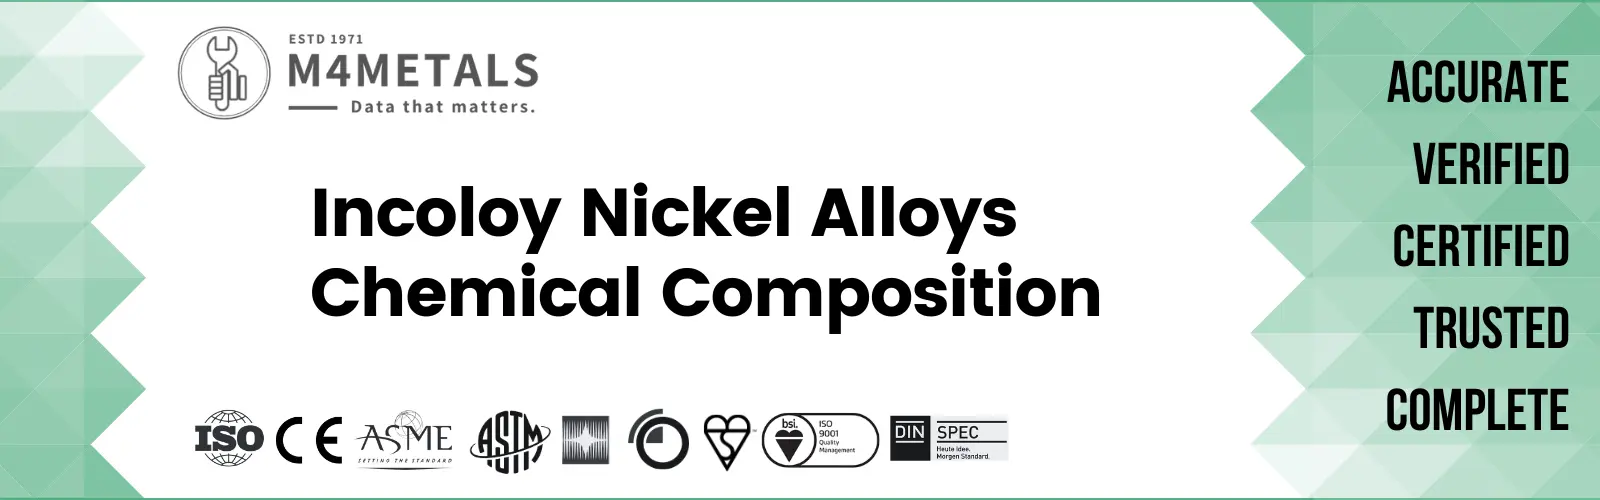 Incoloy Nickel-alloy Chemical Composition